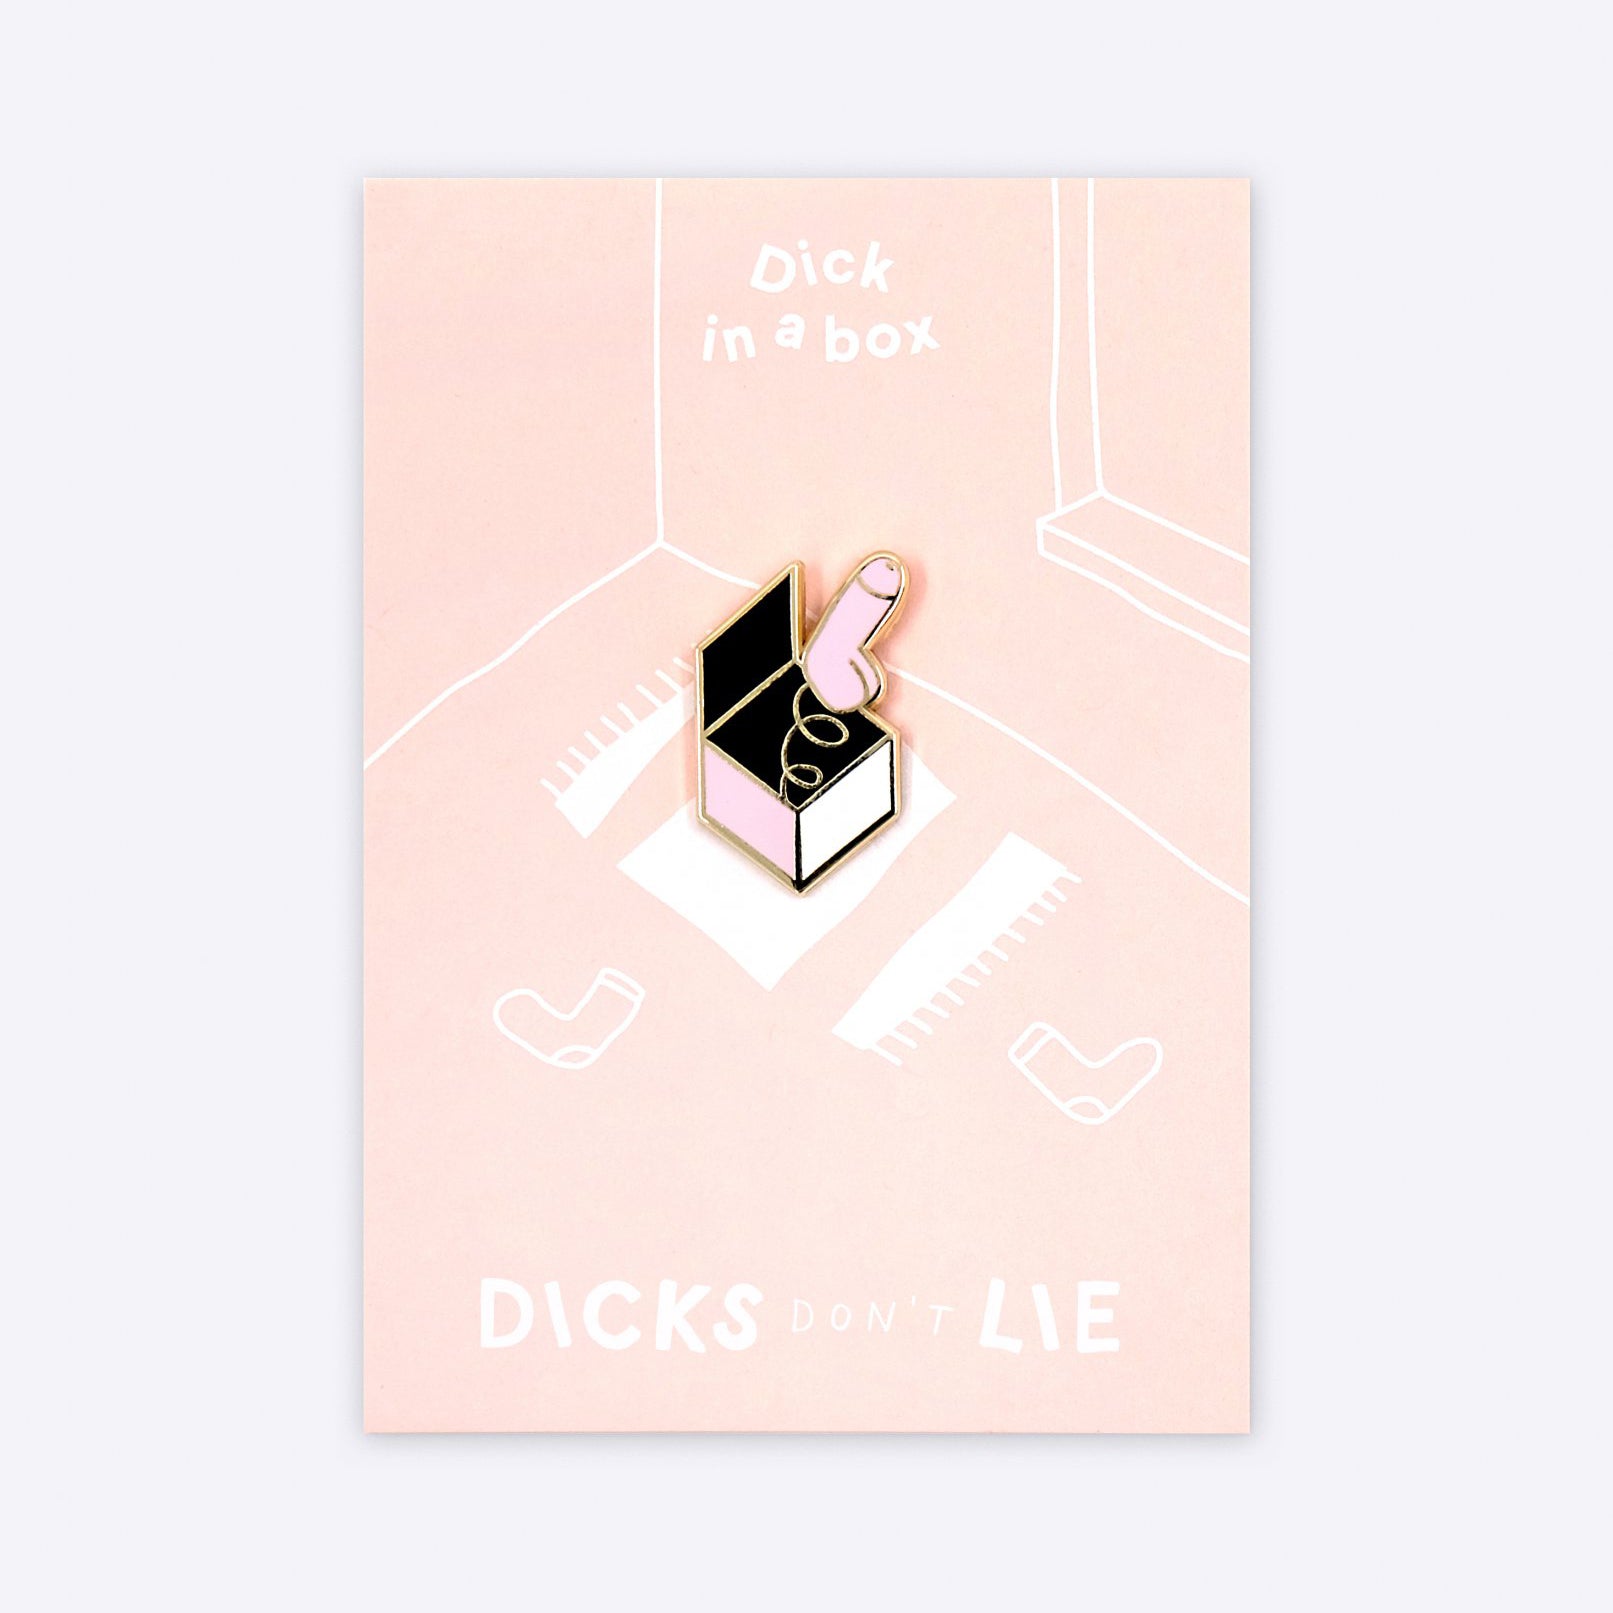 Dicks Don't Lie Dick in a box - Pin